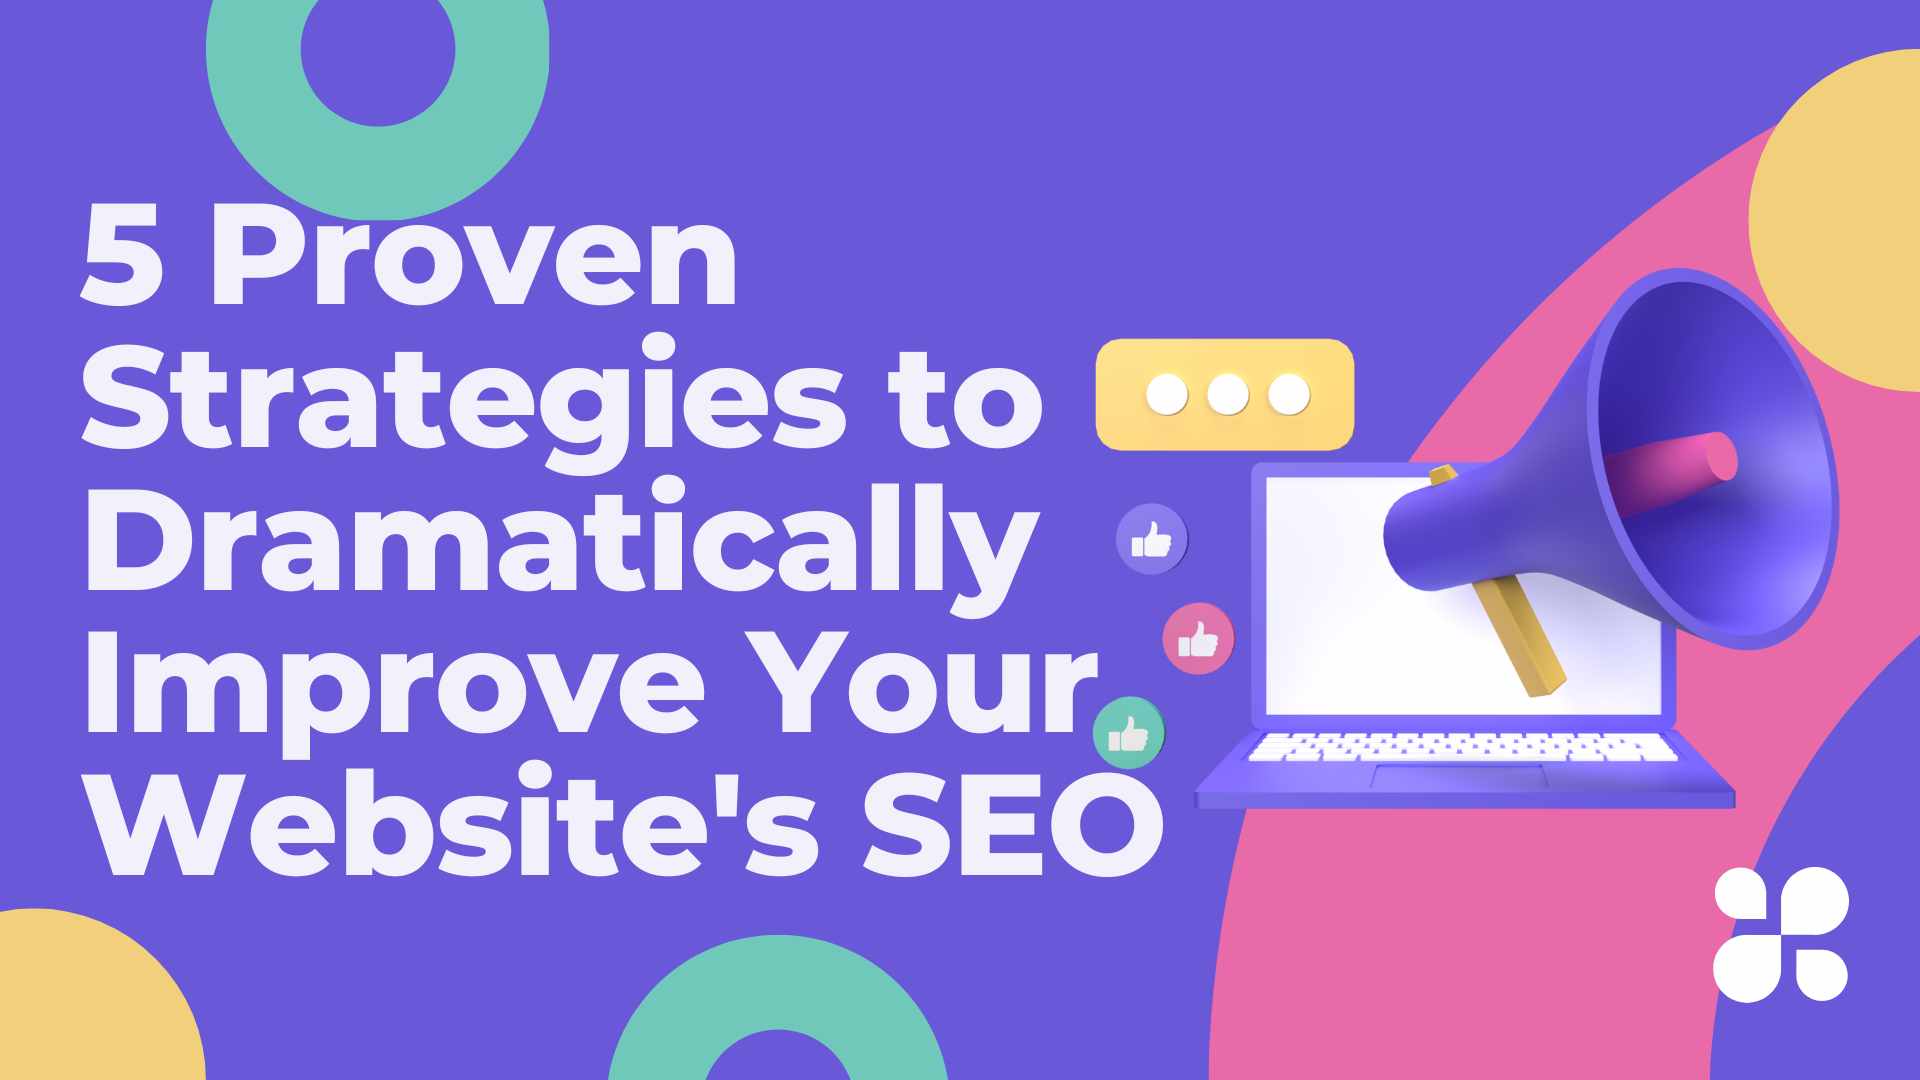 5 Proven Strategies to Dramatically Improve Your Website’s SEO